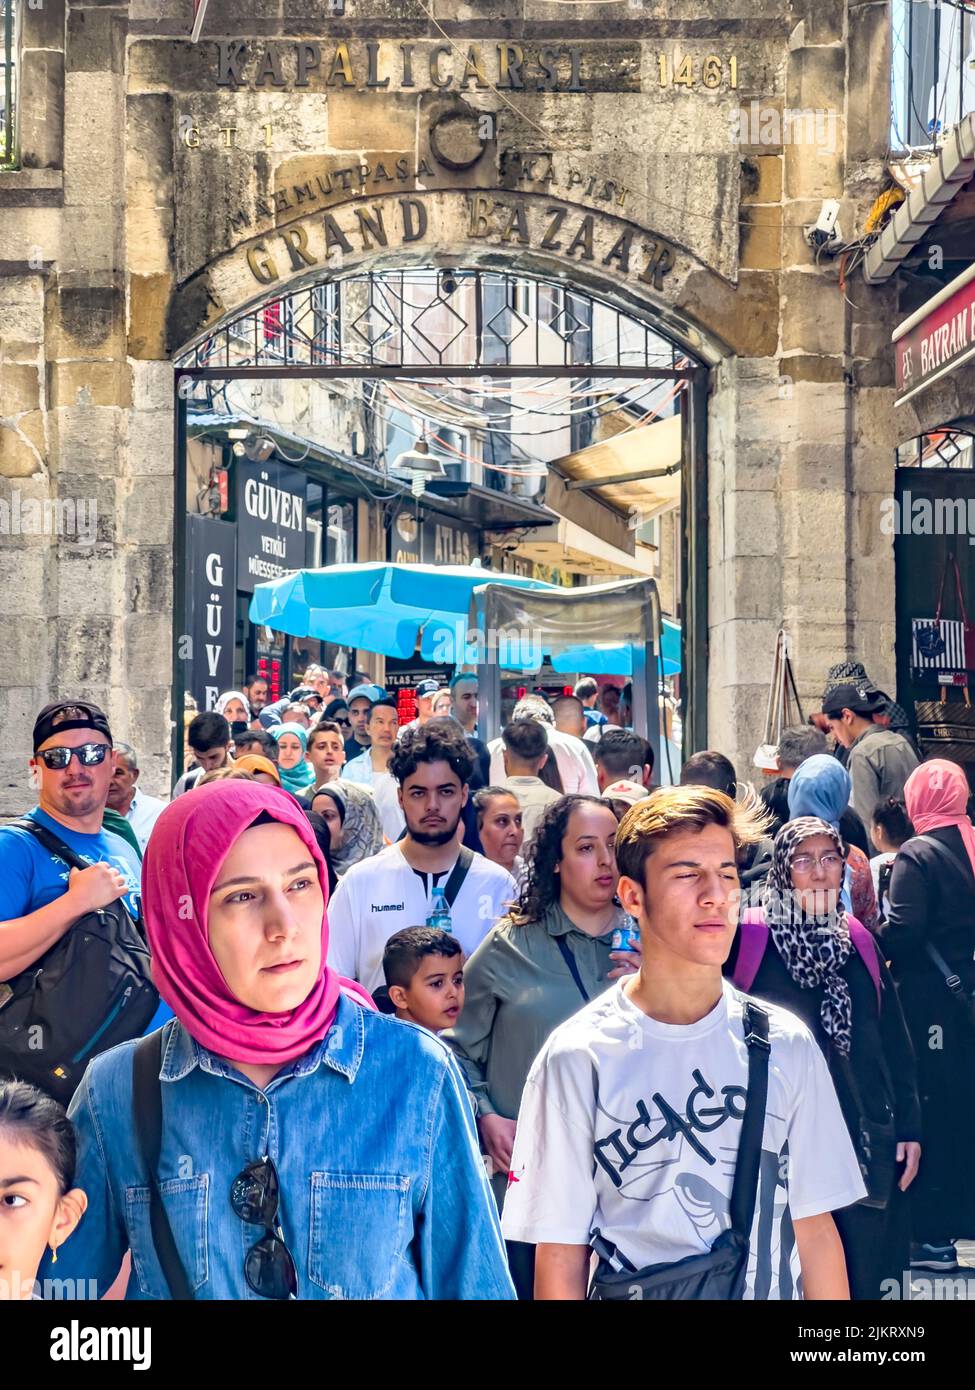 Istanbul, Turkey, 07.14.2022: Grand Bazaar Mahmutpasa Gate Entrance with massive tourist crowds. The largest, oldest covered market in the world. Stock Photo